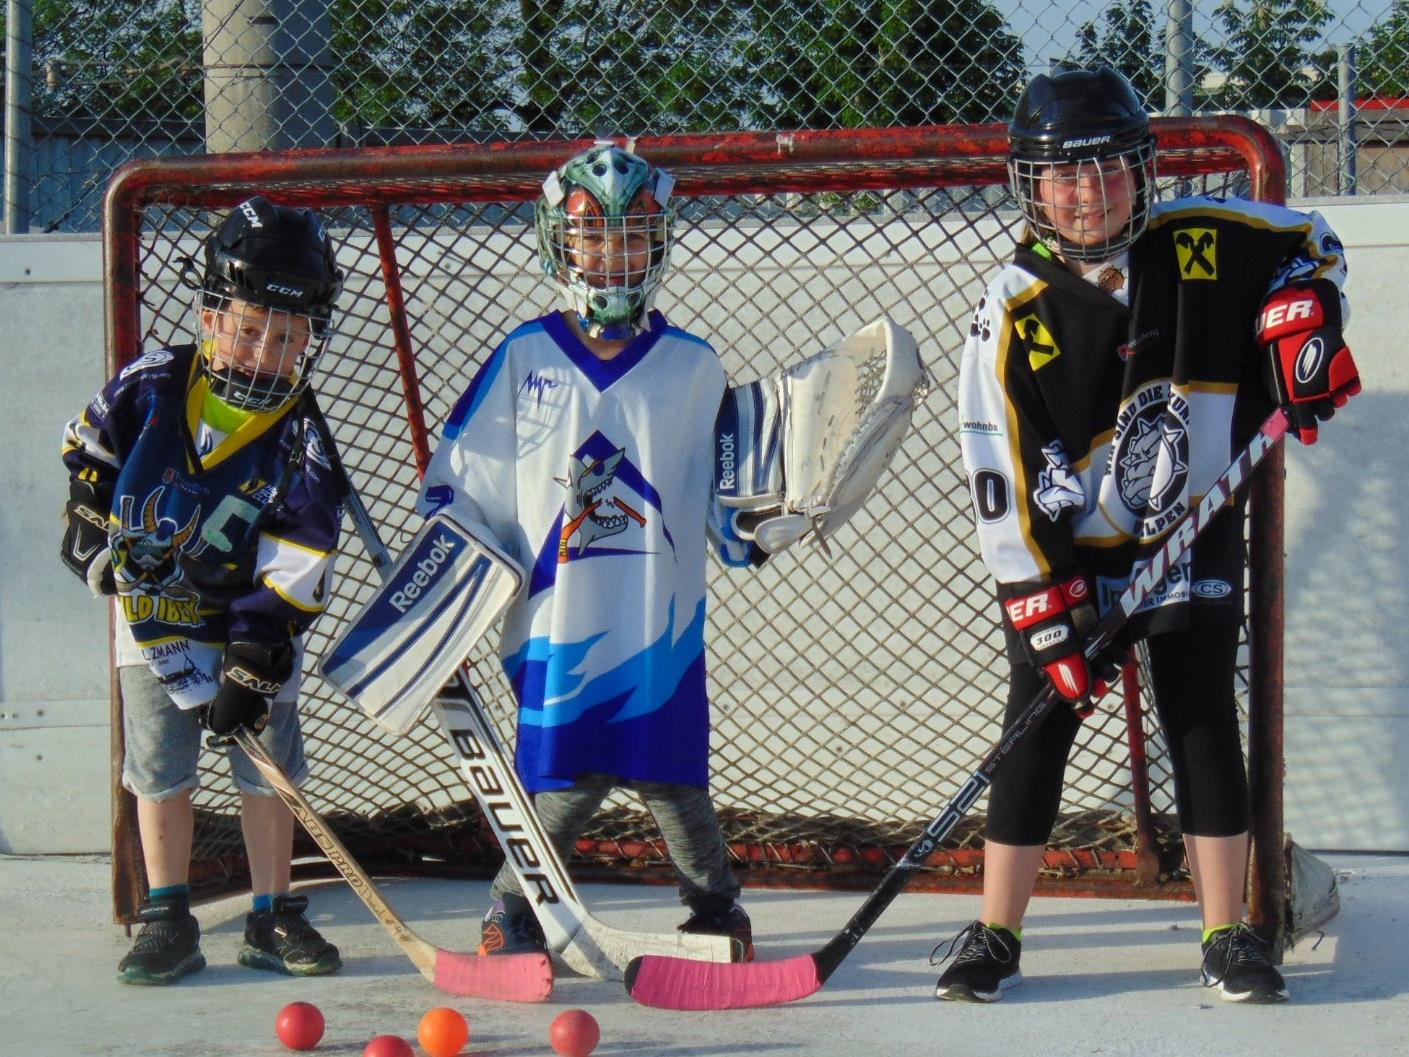 Ball Hockey Event am Donnerstag in Hohenems